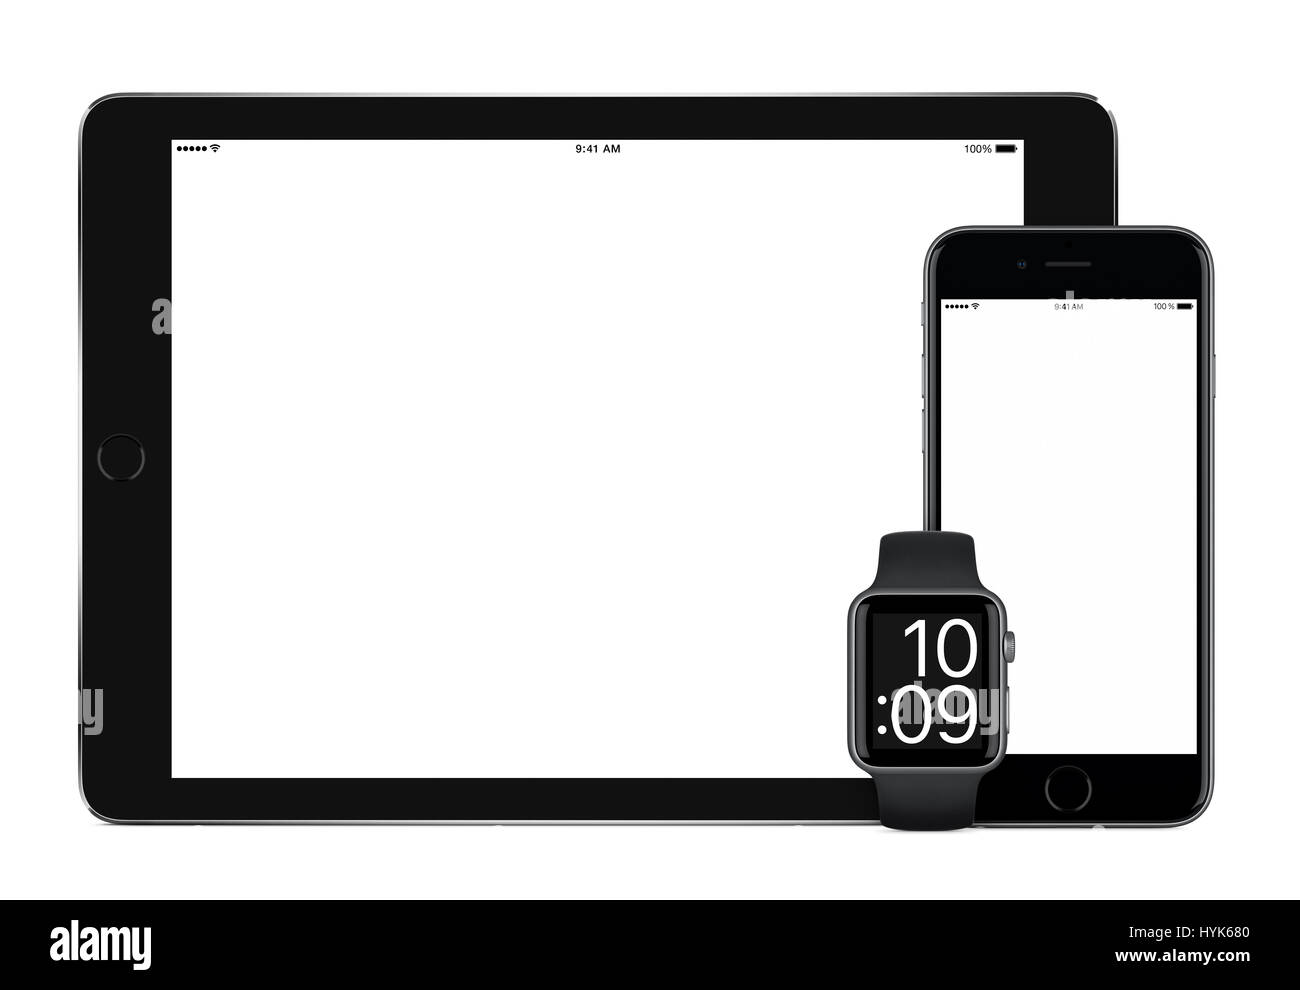 Responsive mockup consisting of black tablet pc, mobile smartphone and smart watch. All gadgets in focus. Isolated on white background. Technology set Stock Photo